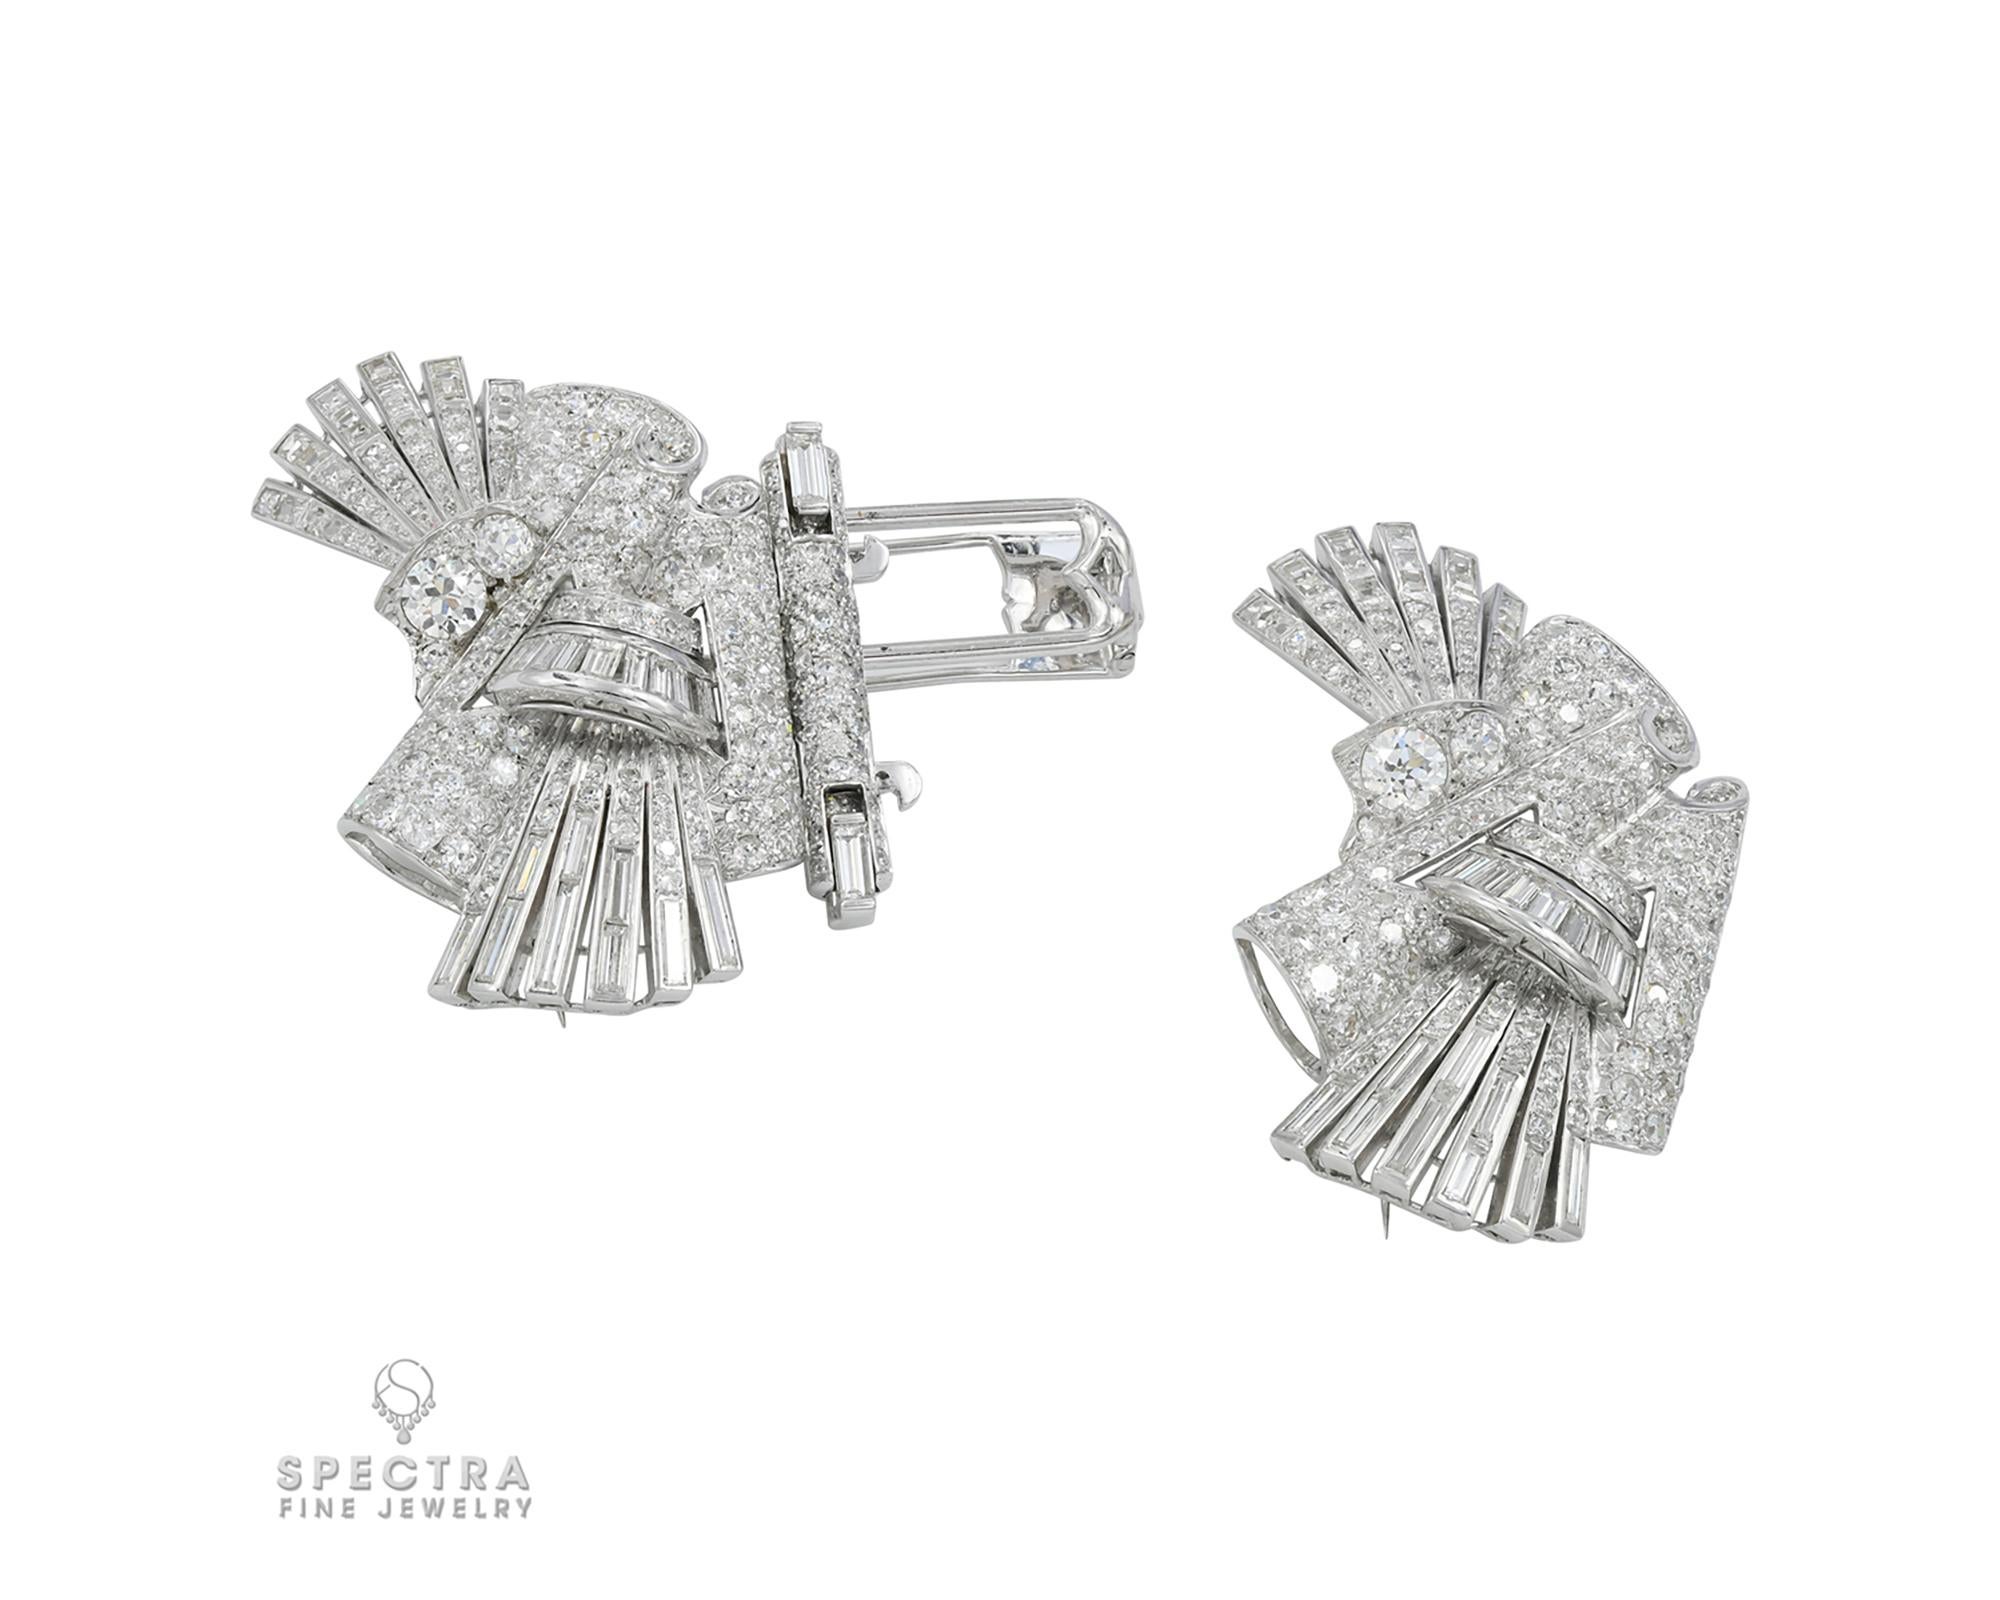 A beautiful Art Deco brooch decorated with white diamonds and set in platinum.
Circa 1940.
The diamonds are old brilliant, single and baguette-cut, of F/G/H colors, VS clarity.
Gross weight is 46.65 gr.
Can be worn as one piece or two individual